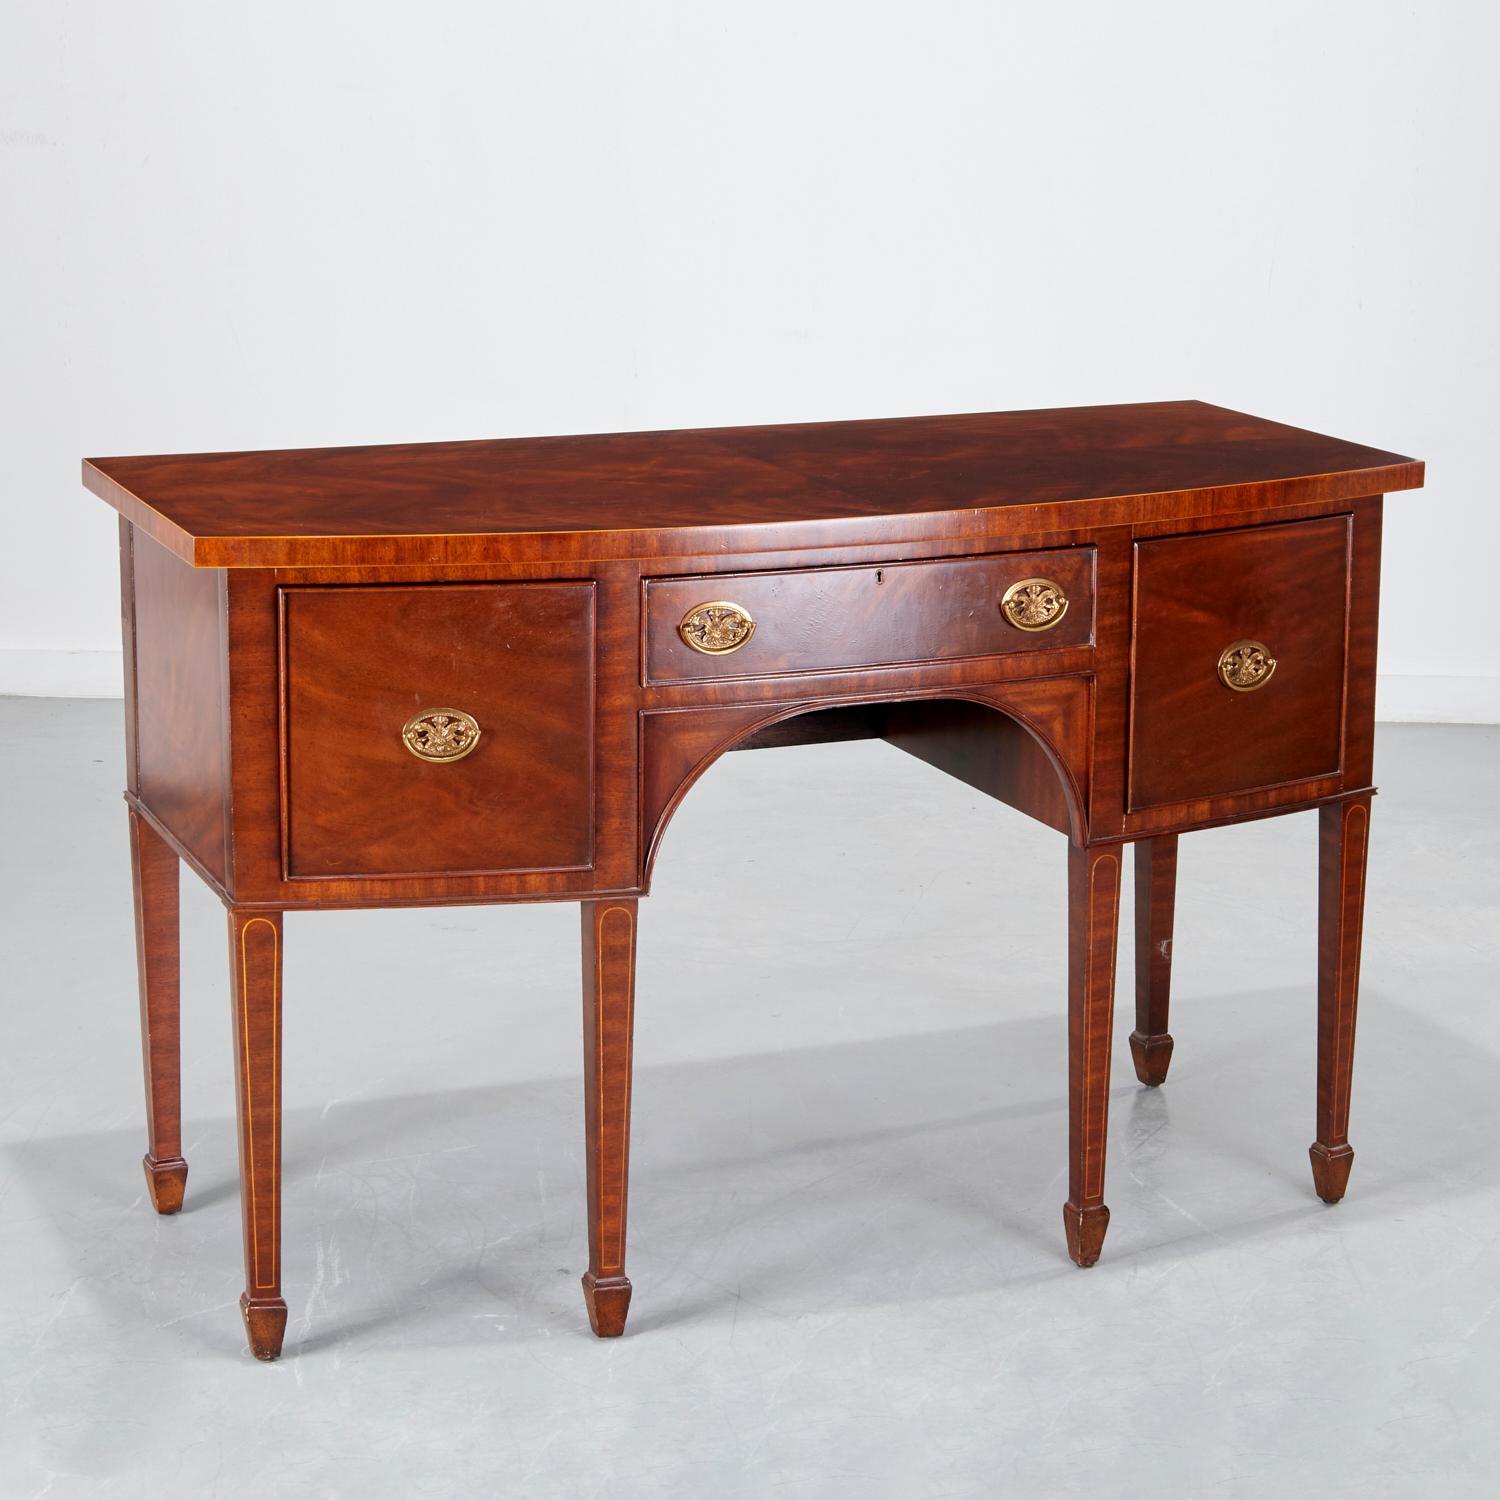 20th C. Three Drawer Georgian Style Mahogany Sideboard with Inlaid Stringing For Sale 1